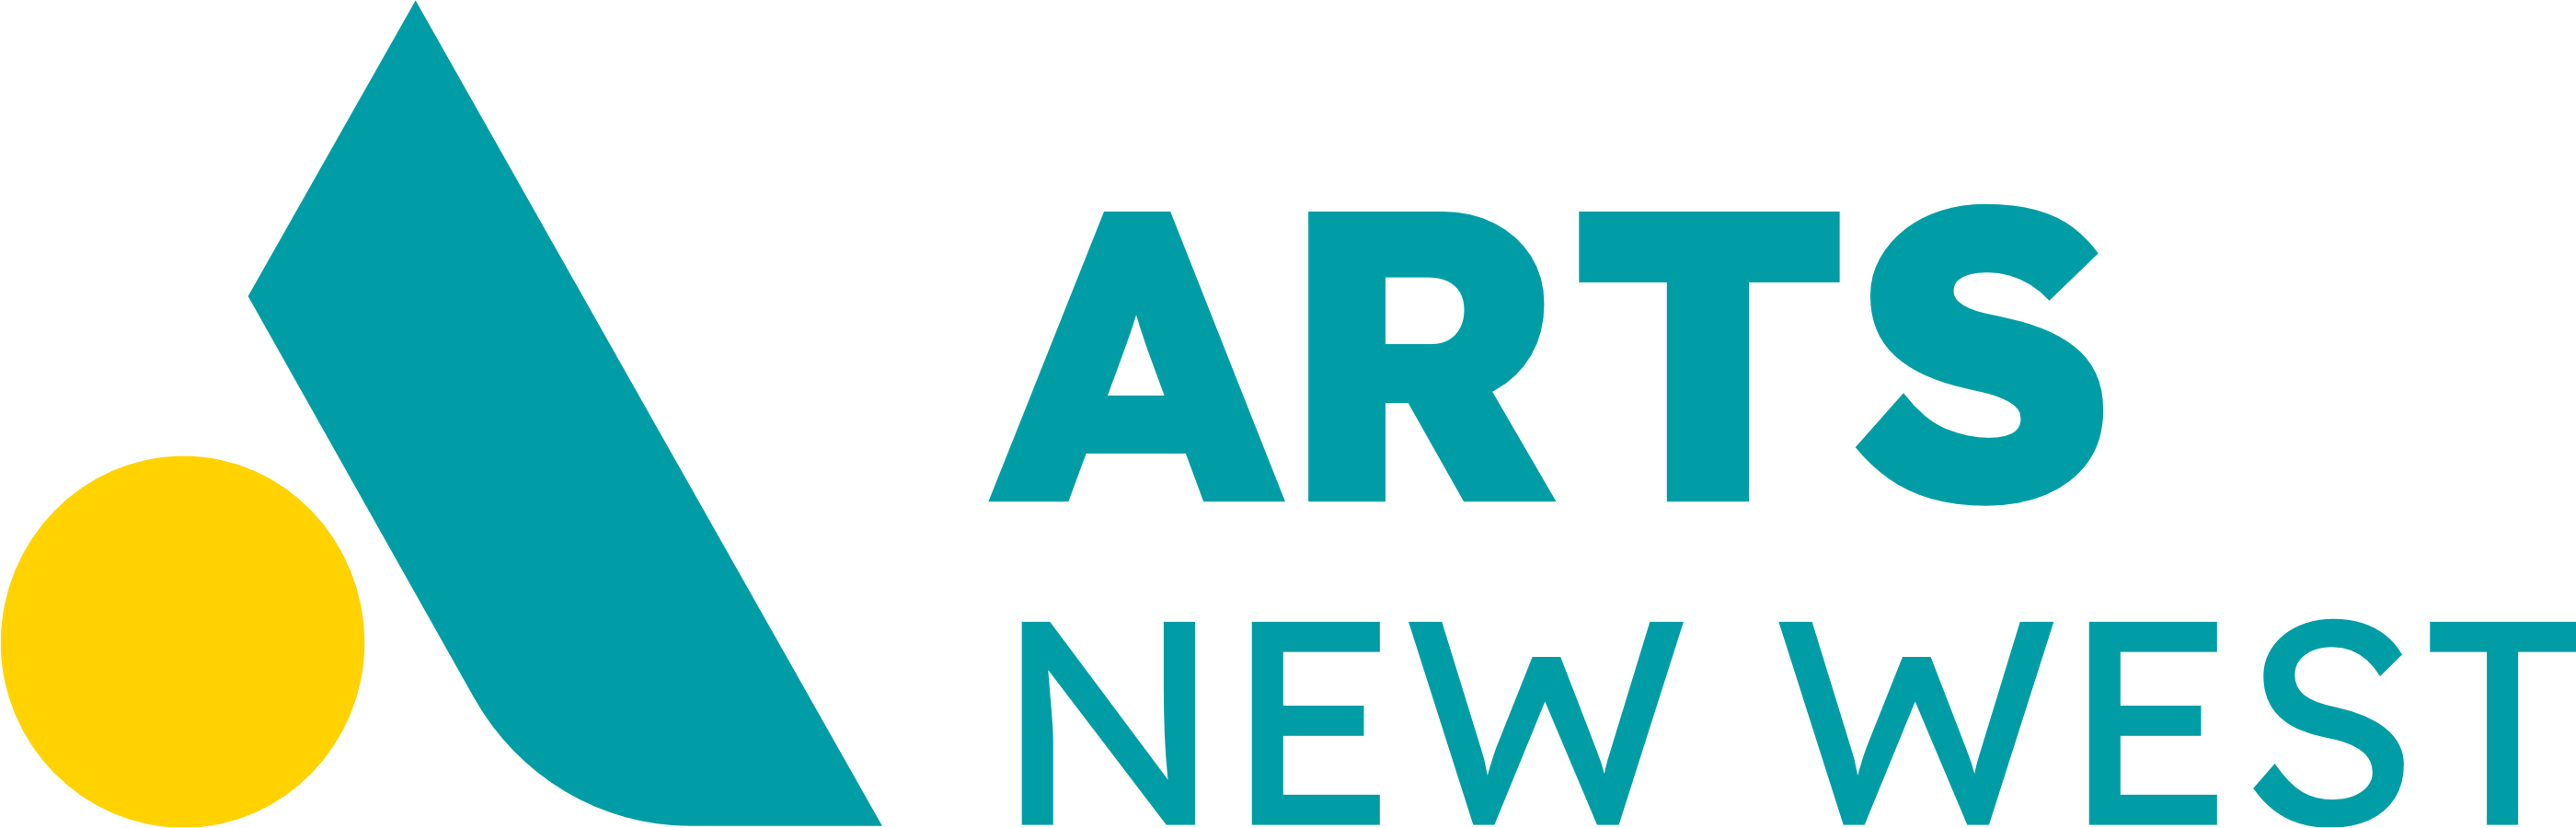 With a stylized A on the left hand side, the words read Arts New West in turquoise.